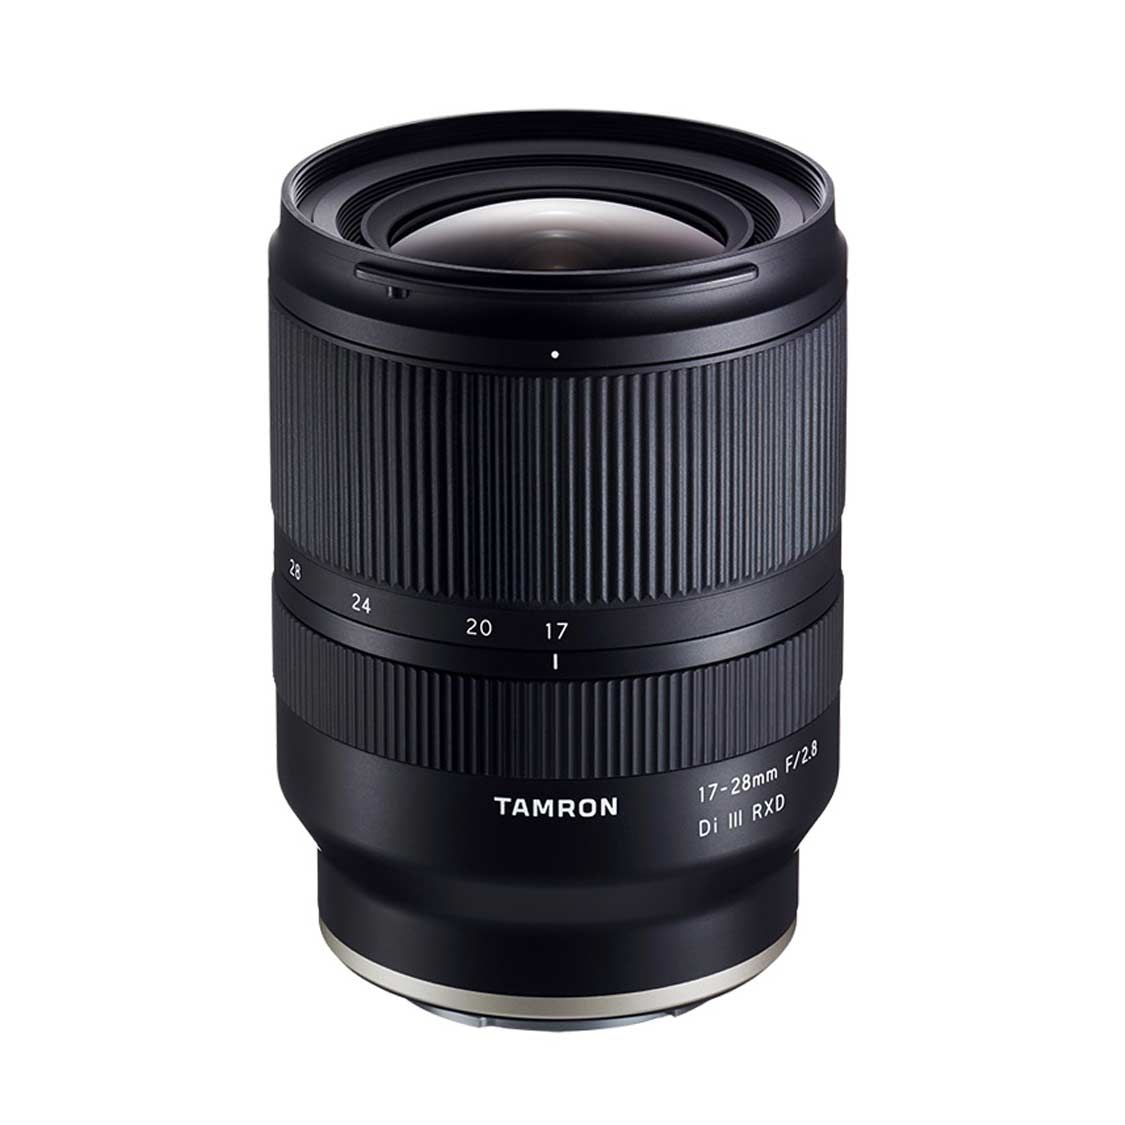 Tamron 17-28mm f2.8 DI RXD for Sony E-Mount